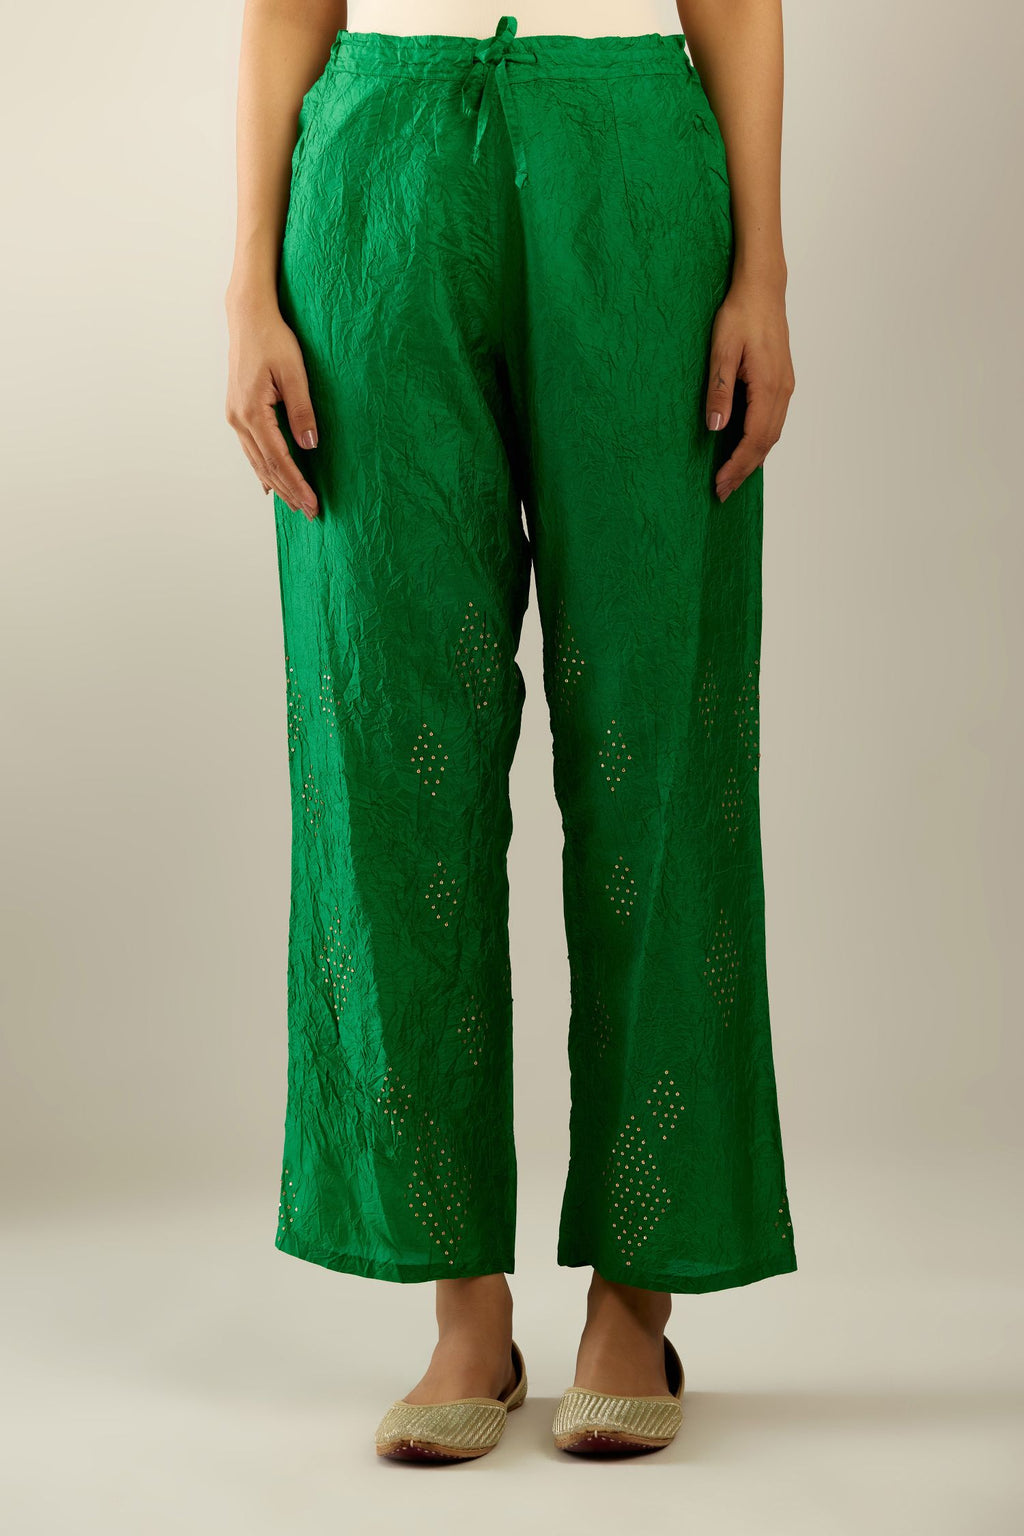 Grass green hand crushed pure silk straight pants with assorted diamond shape golden sequins work till knee length and side pockets.